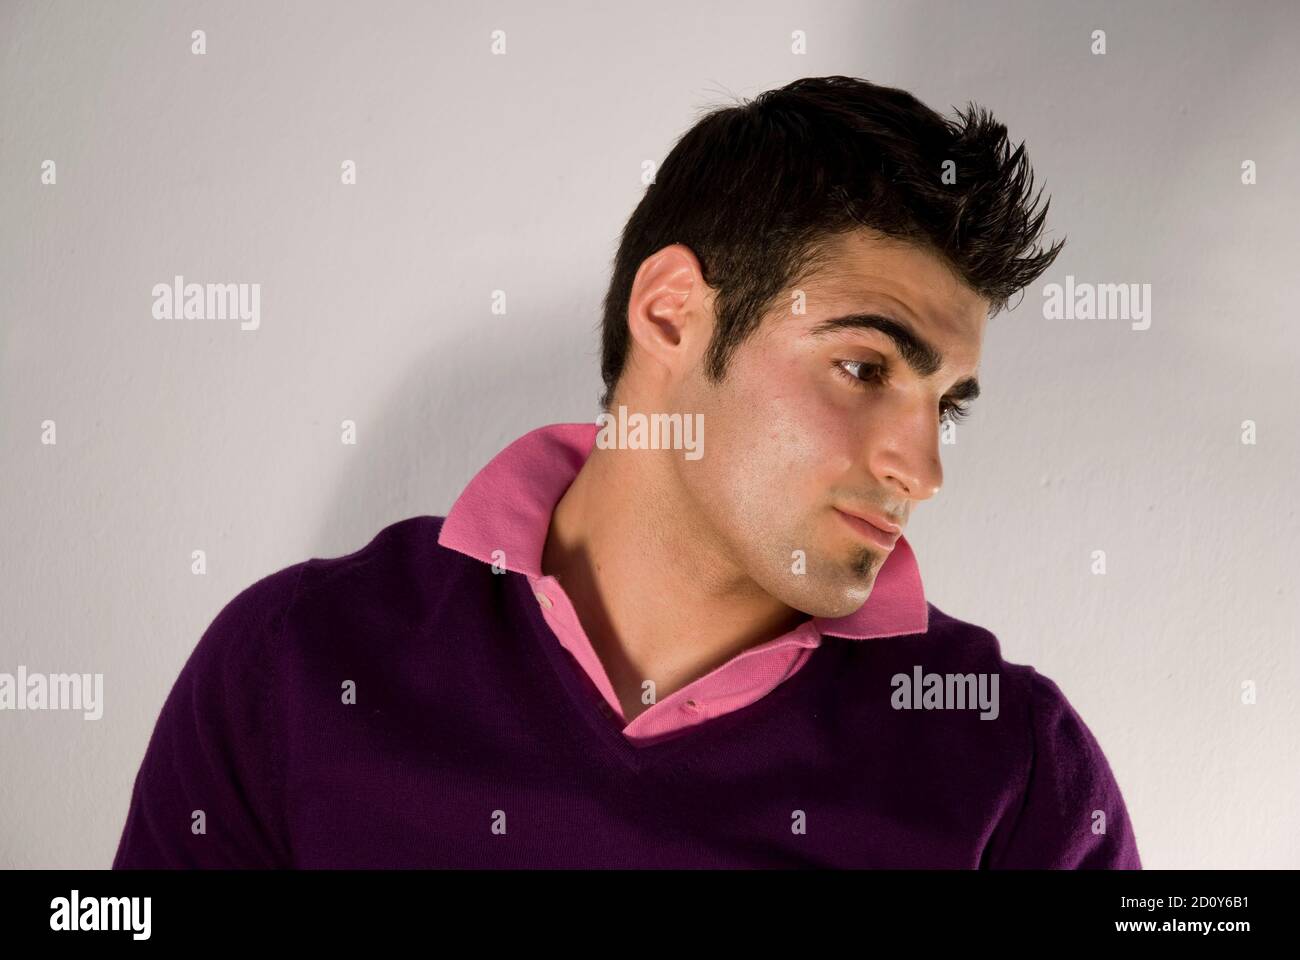 Young man. Stock Photo